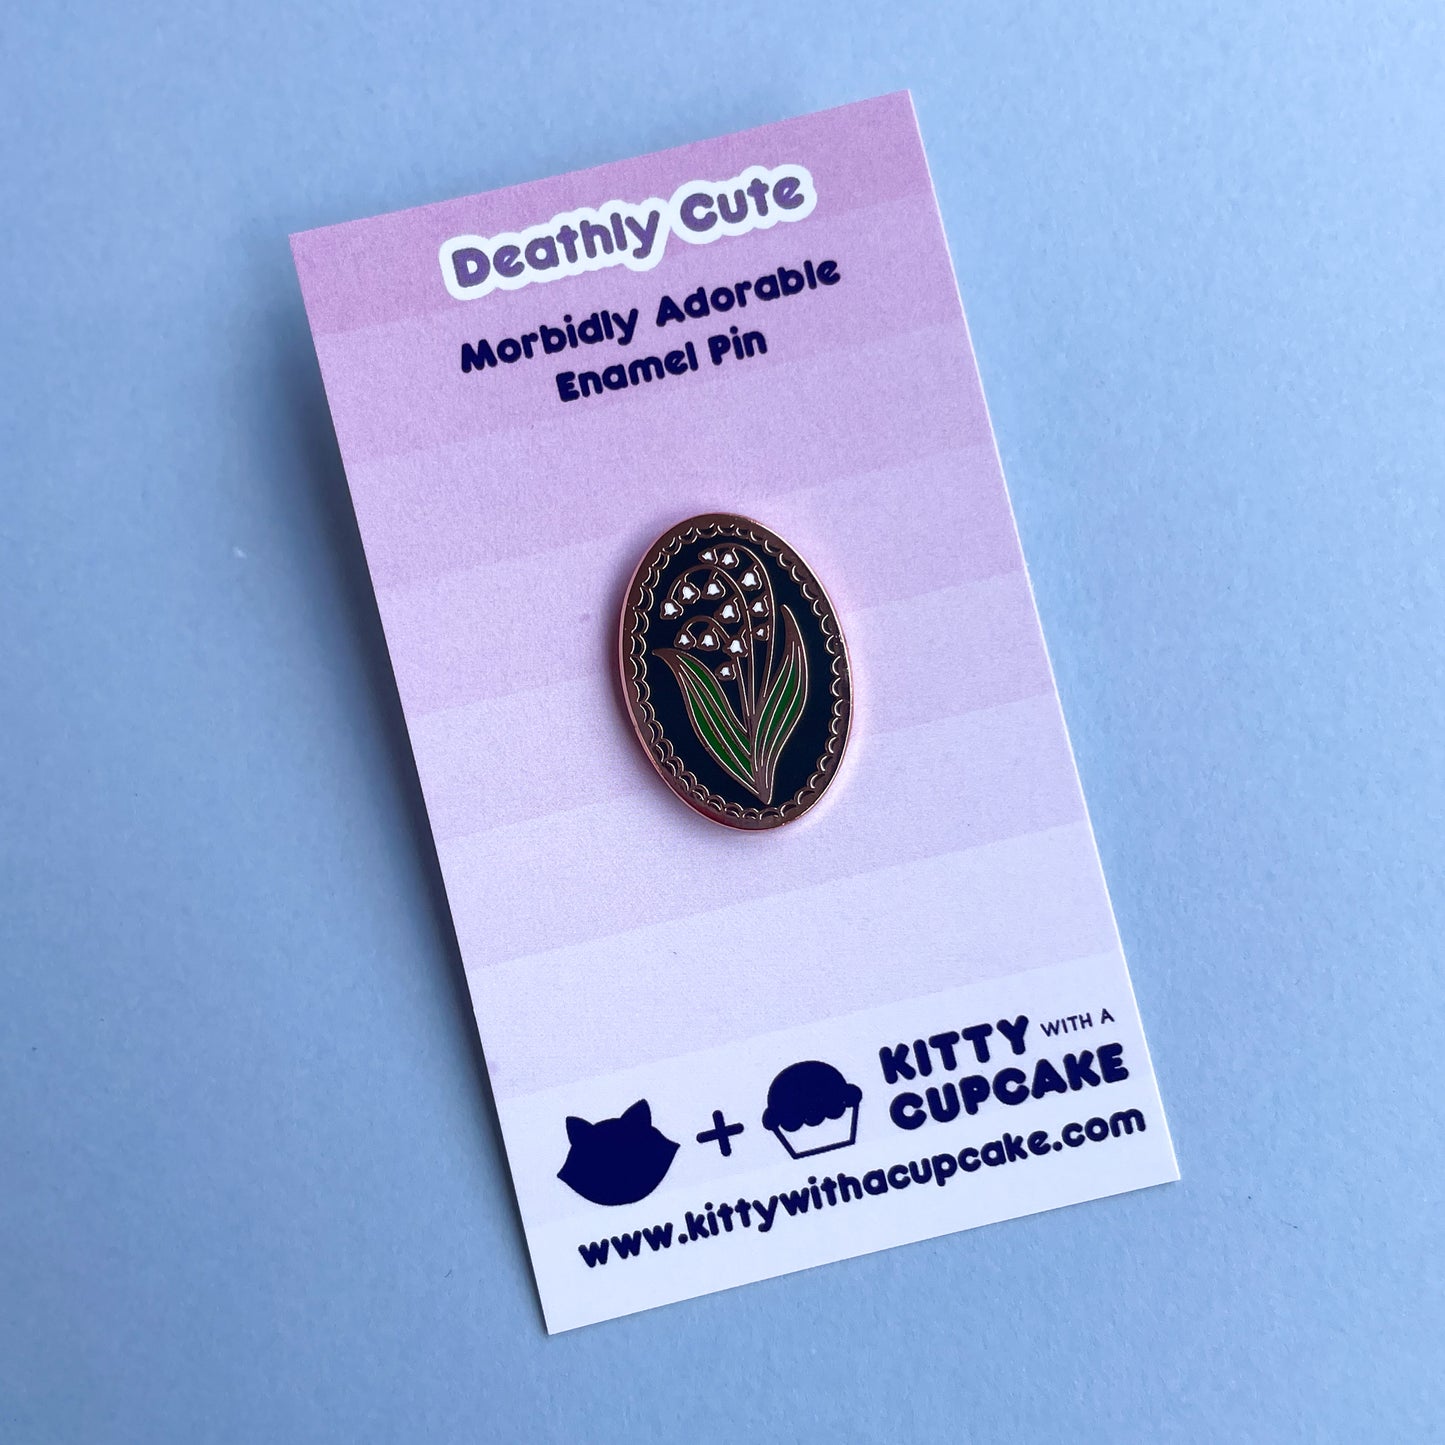 An oval shaped enamel pin with a lily of the valley flower on it on a pink card. 